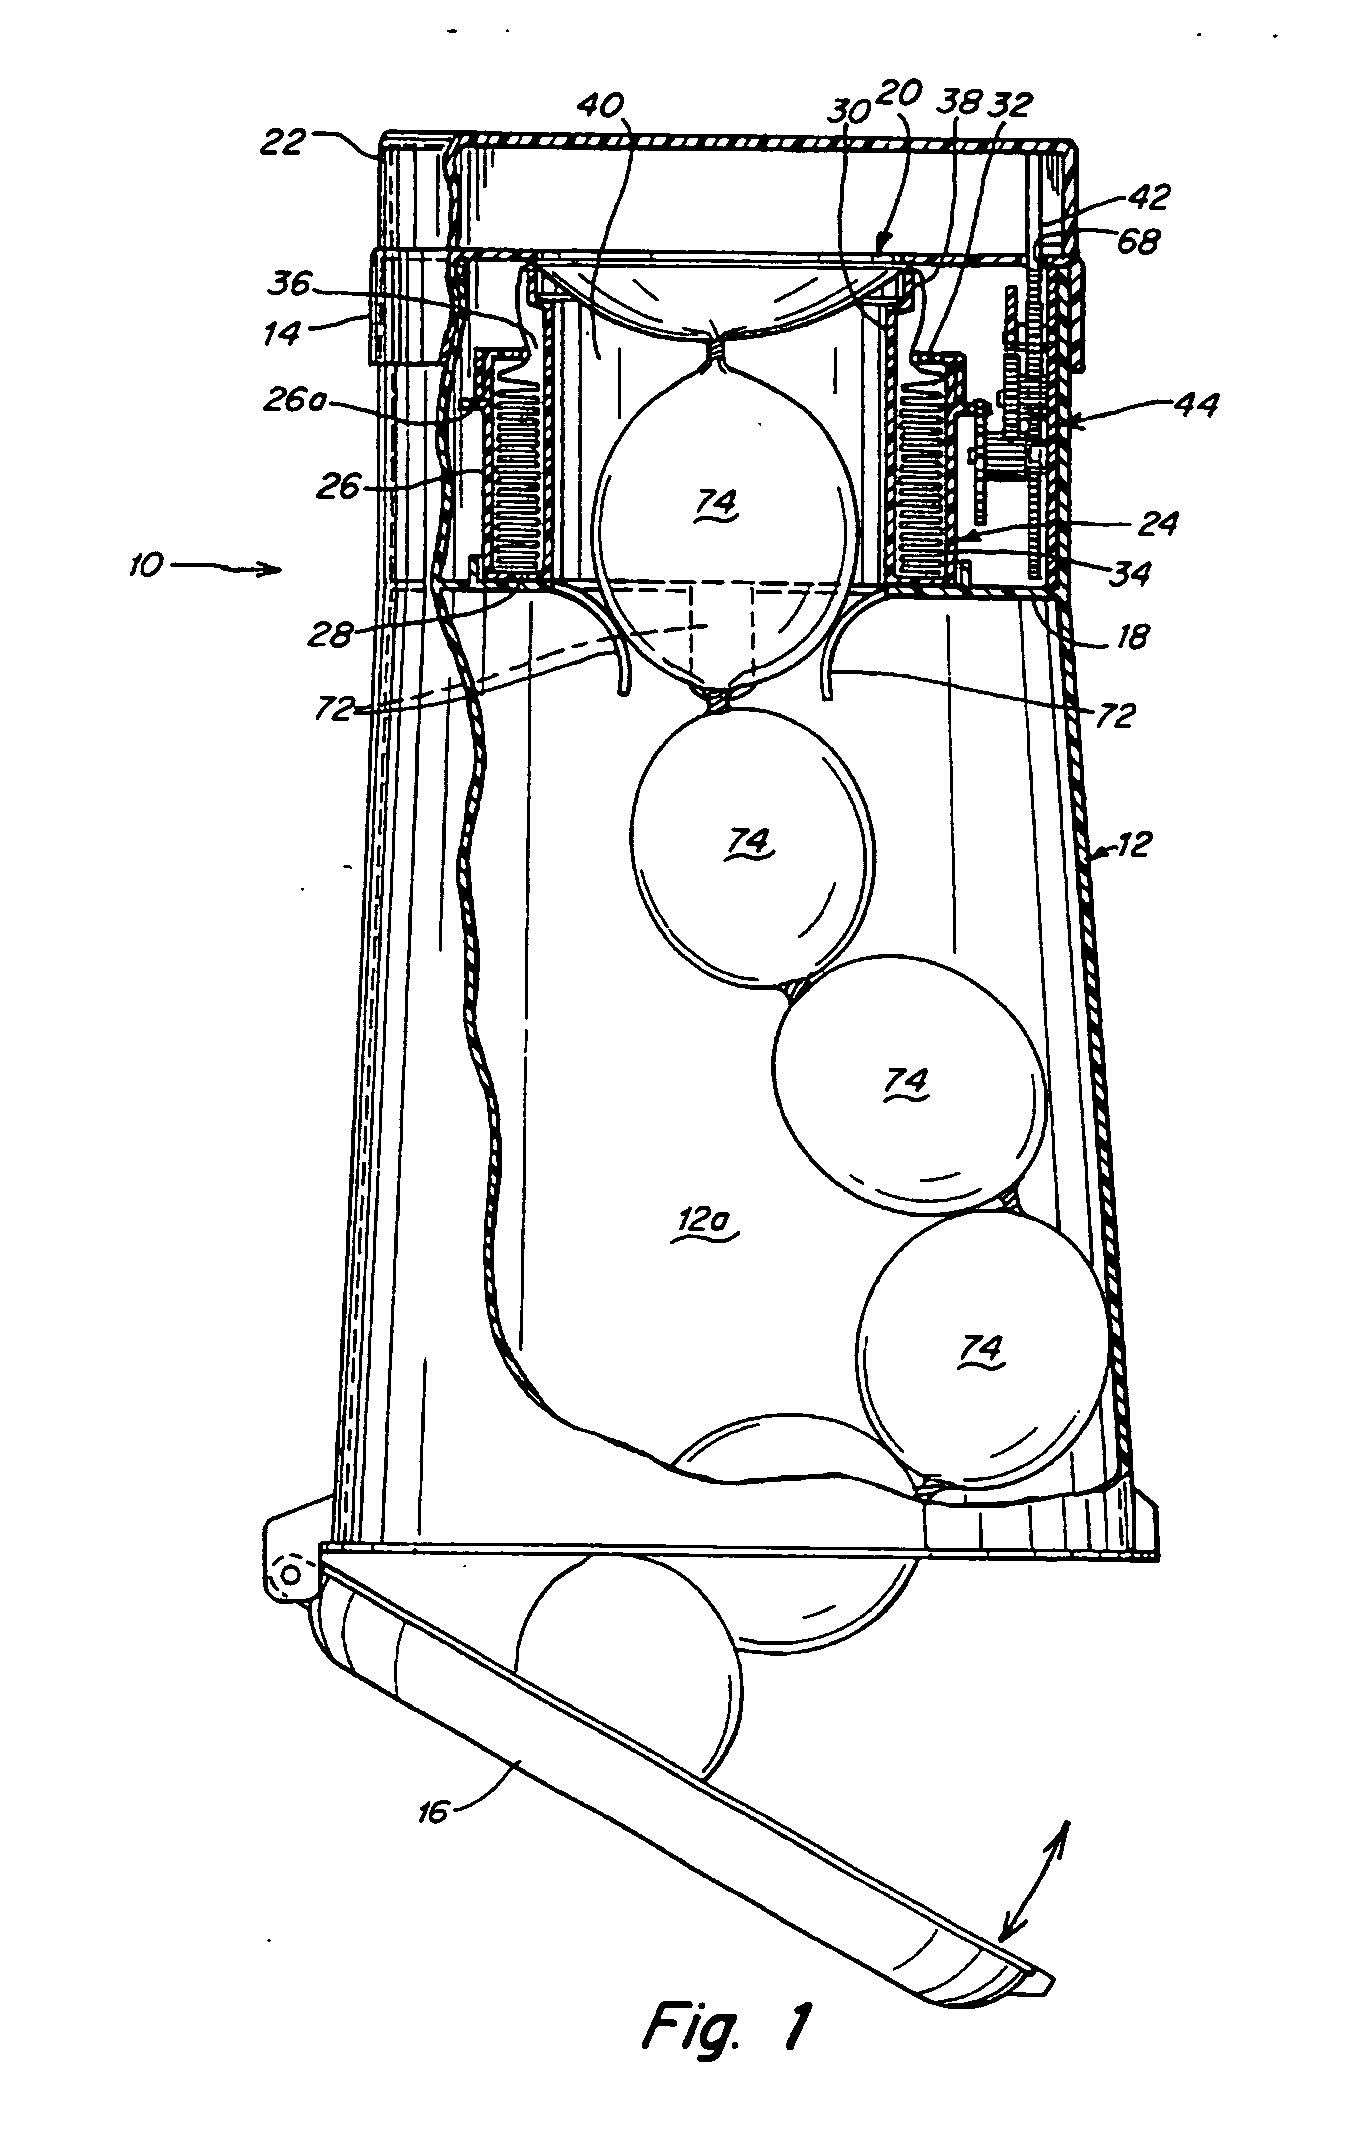 Waste disposal device including an external actuation mechanism to operate a cartridge